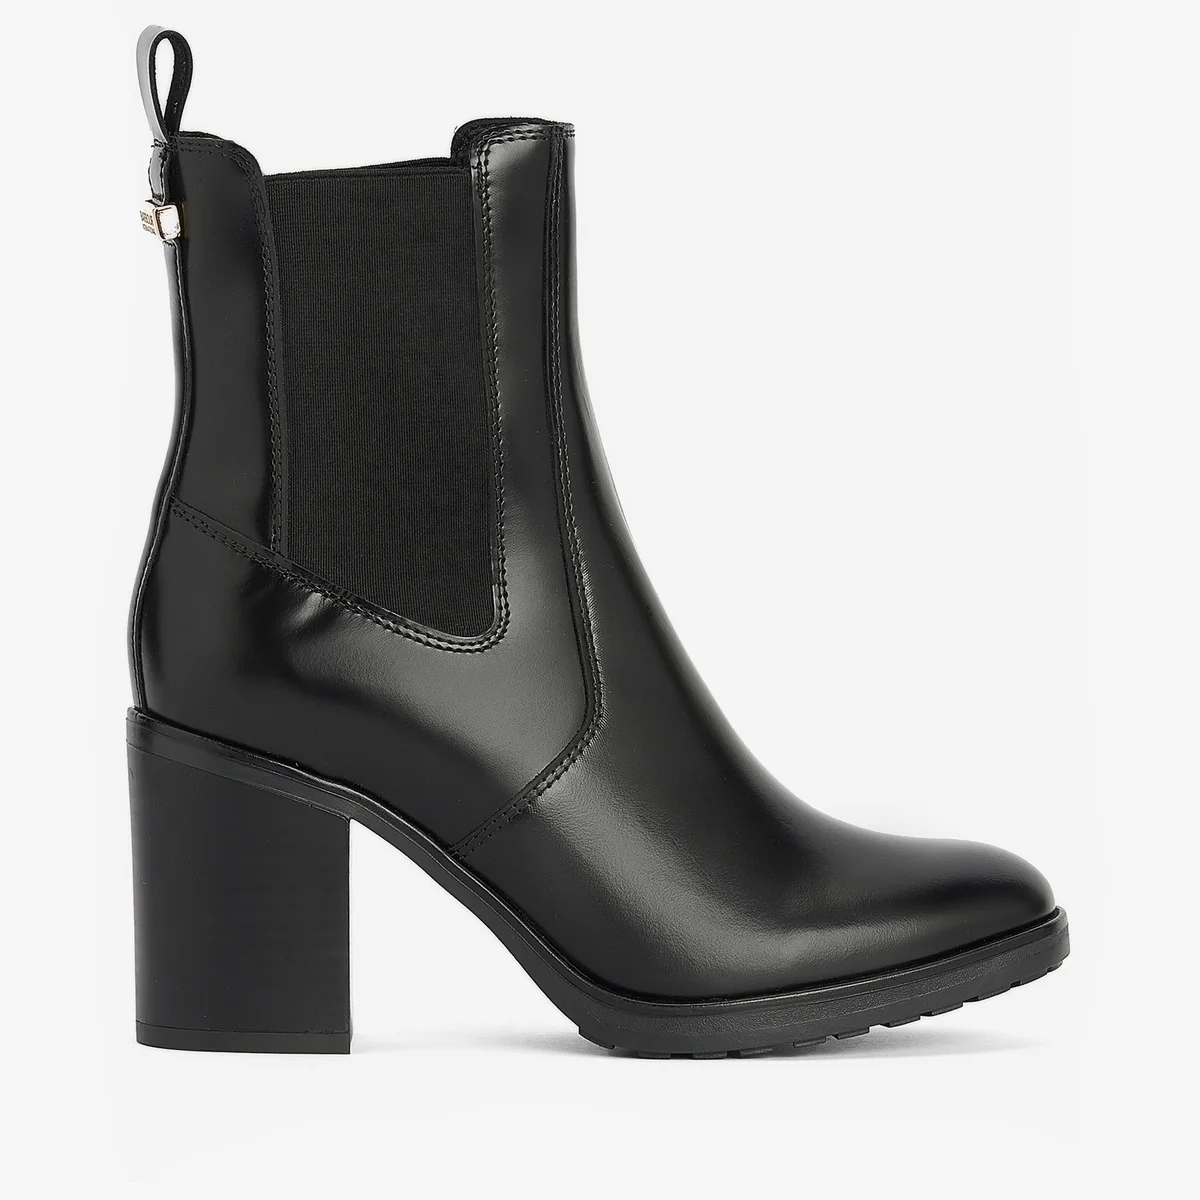 Barbour International Women's Cosmos Leather Heeled Chelsea Boots Image 1